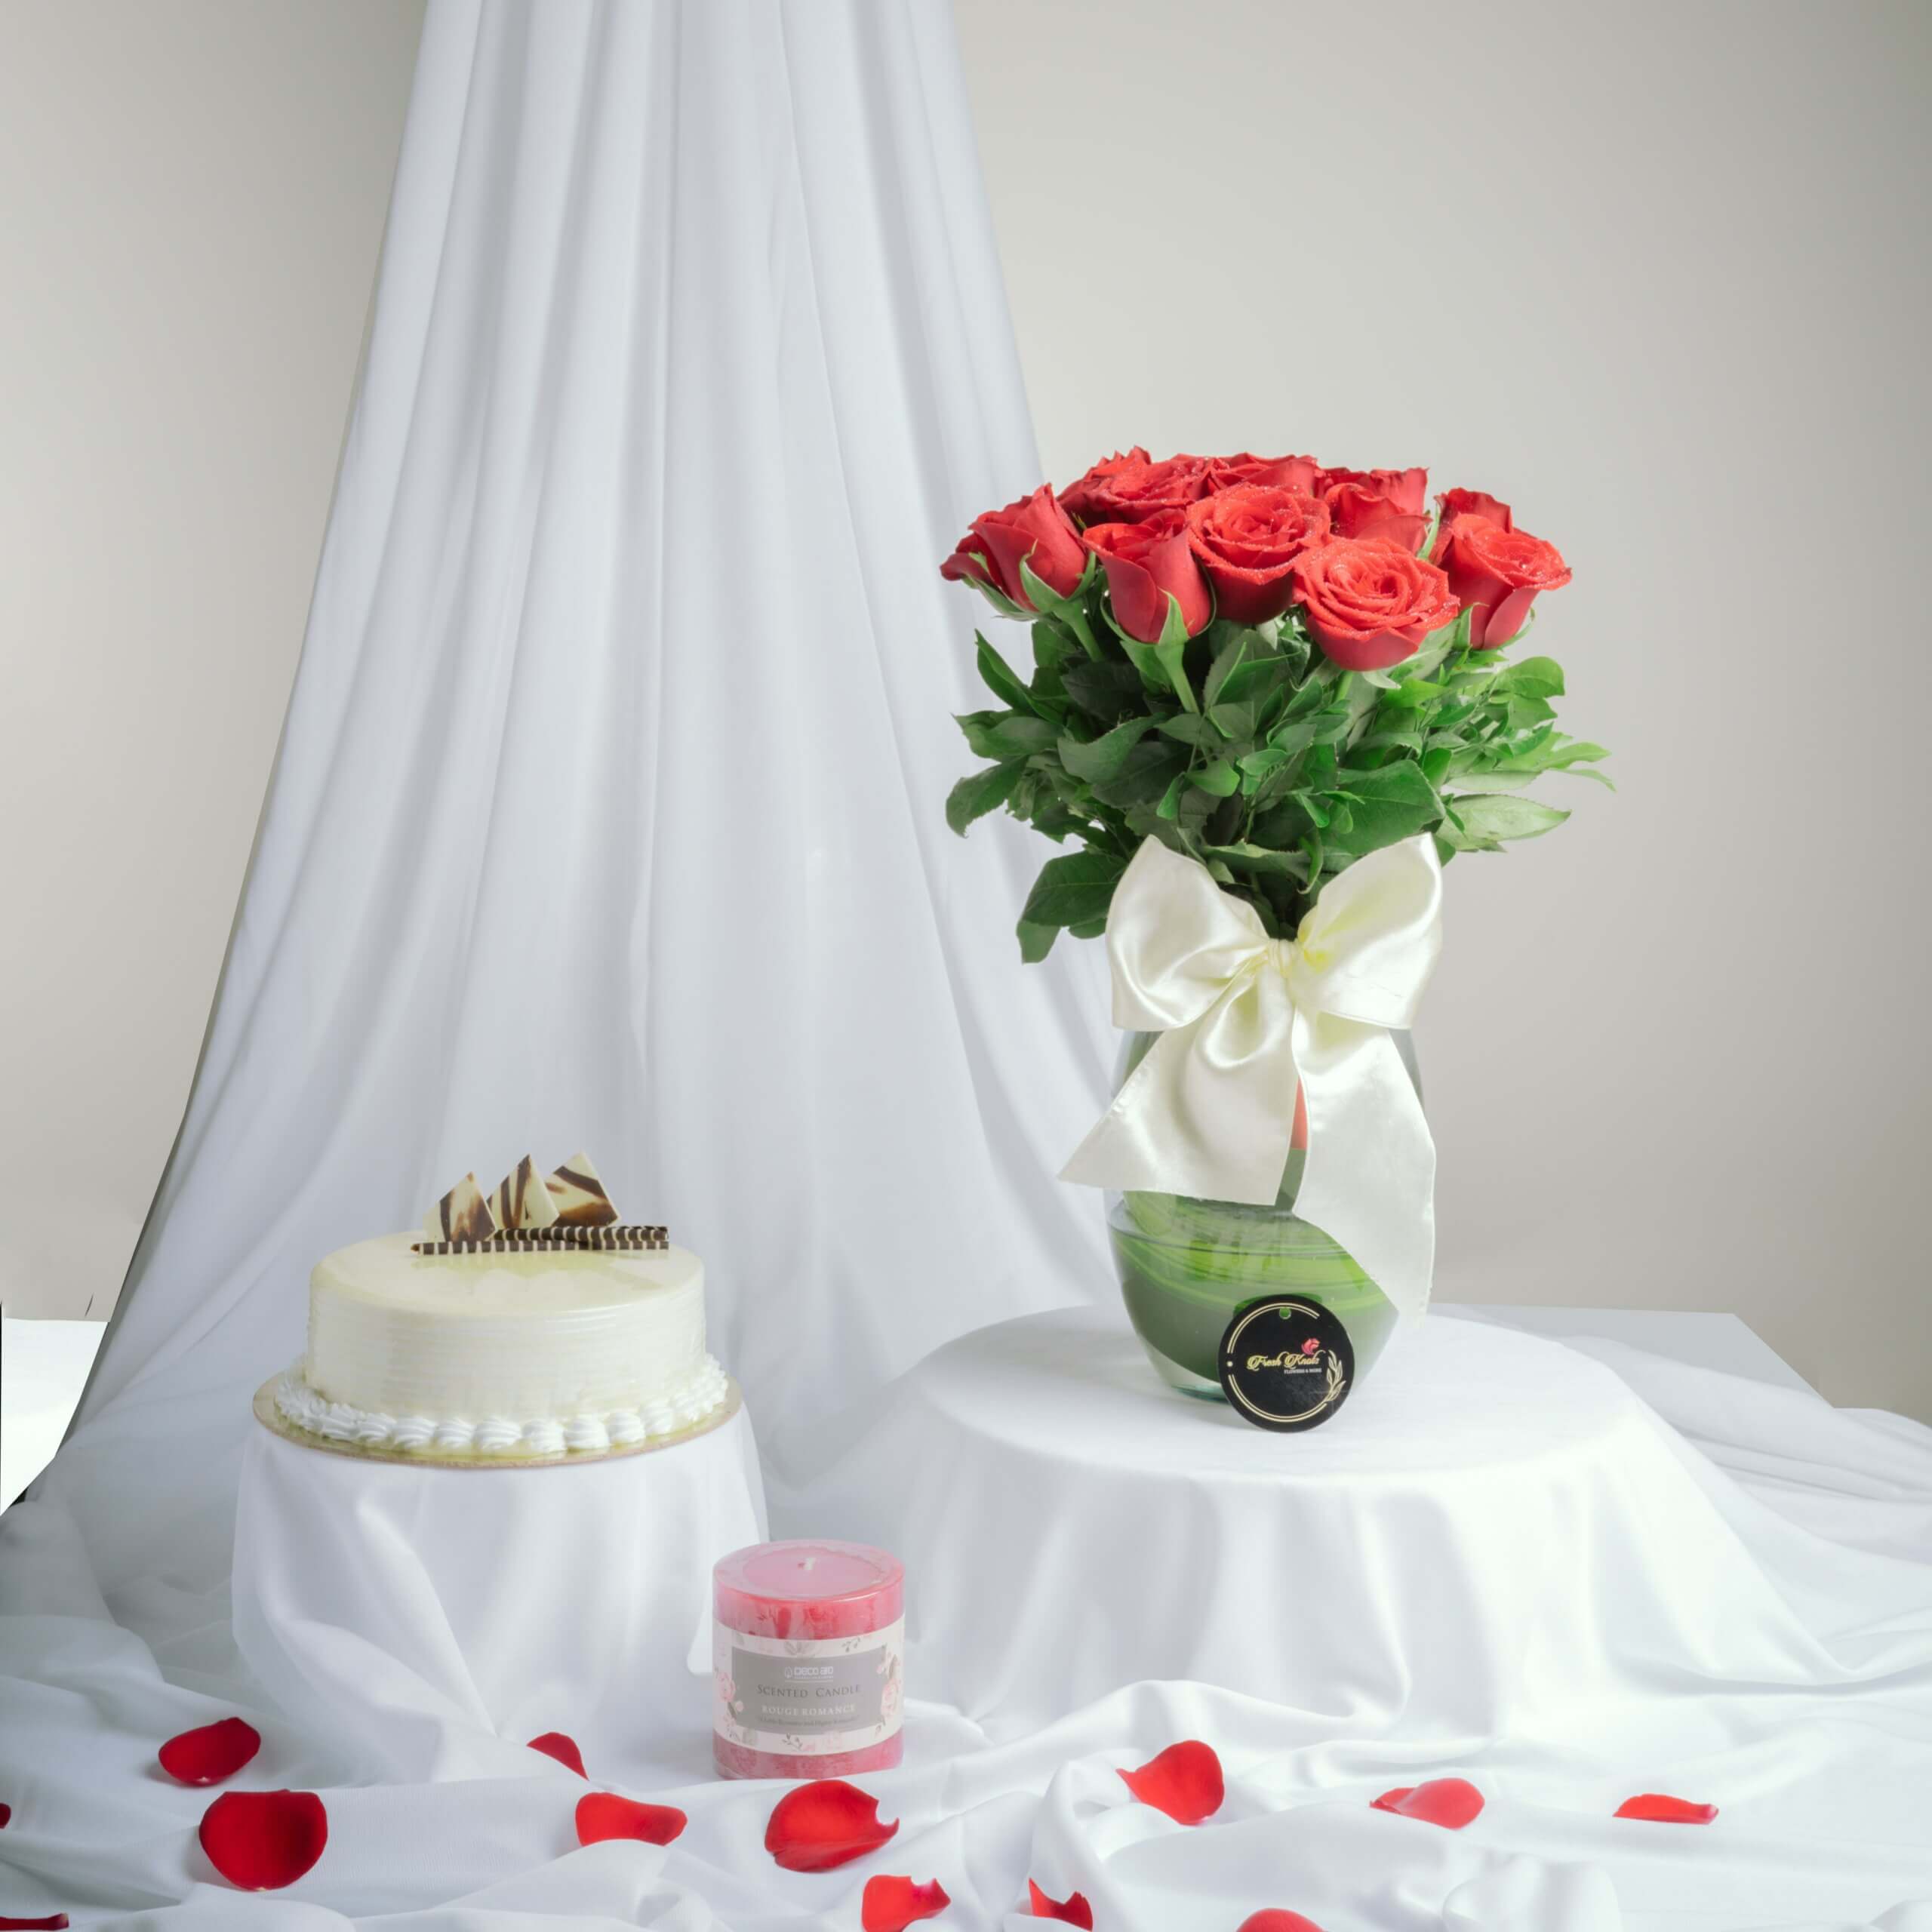 Roses-In-A-Vase-With-Cake - gifts with flowers